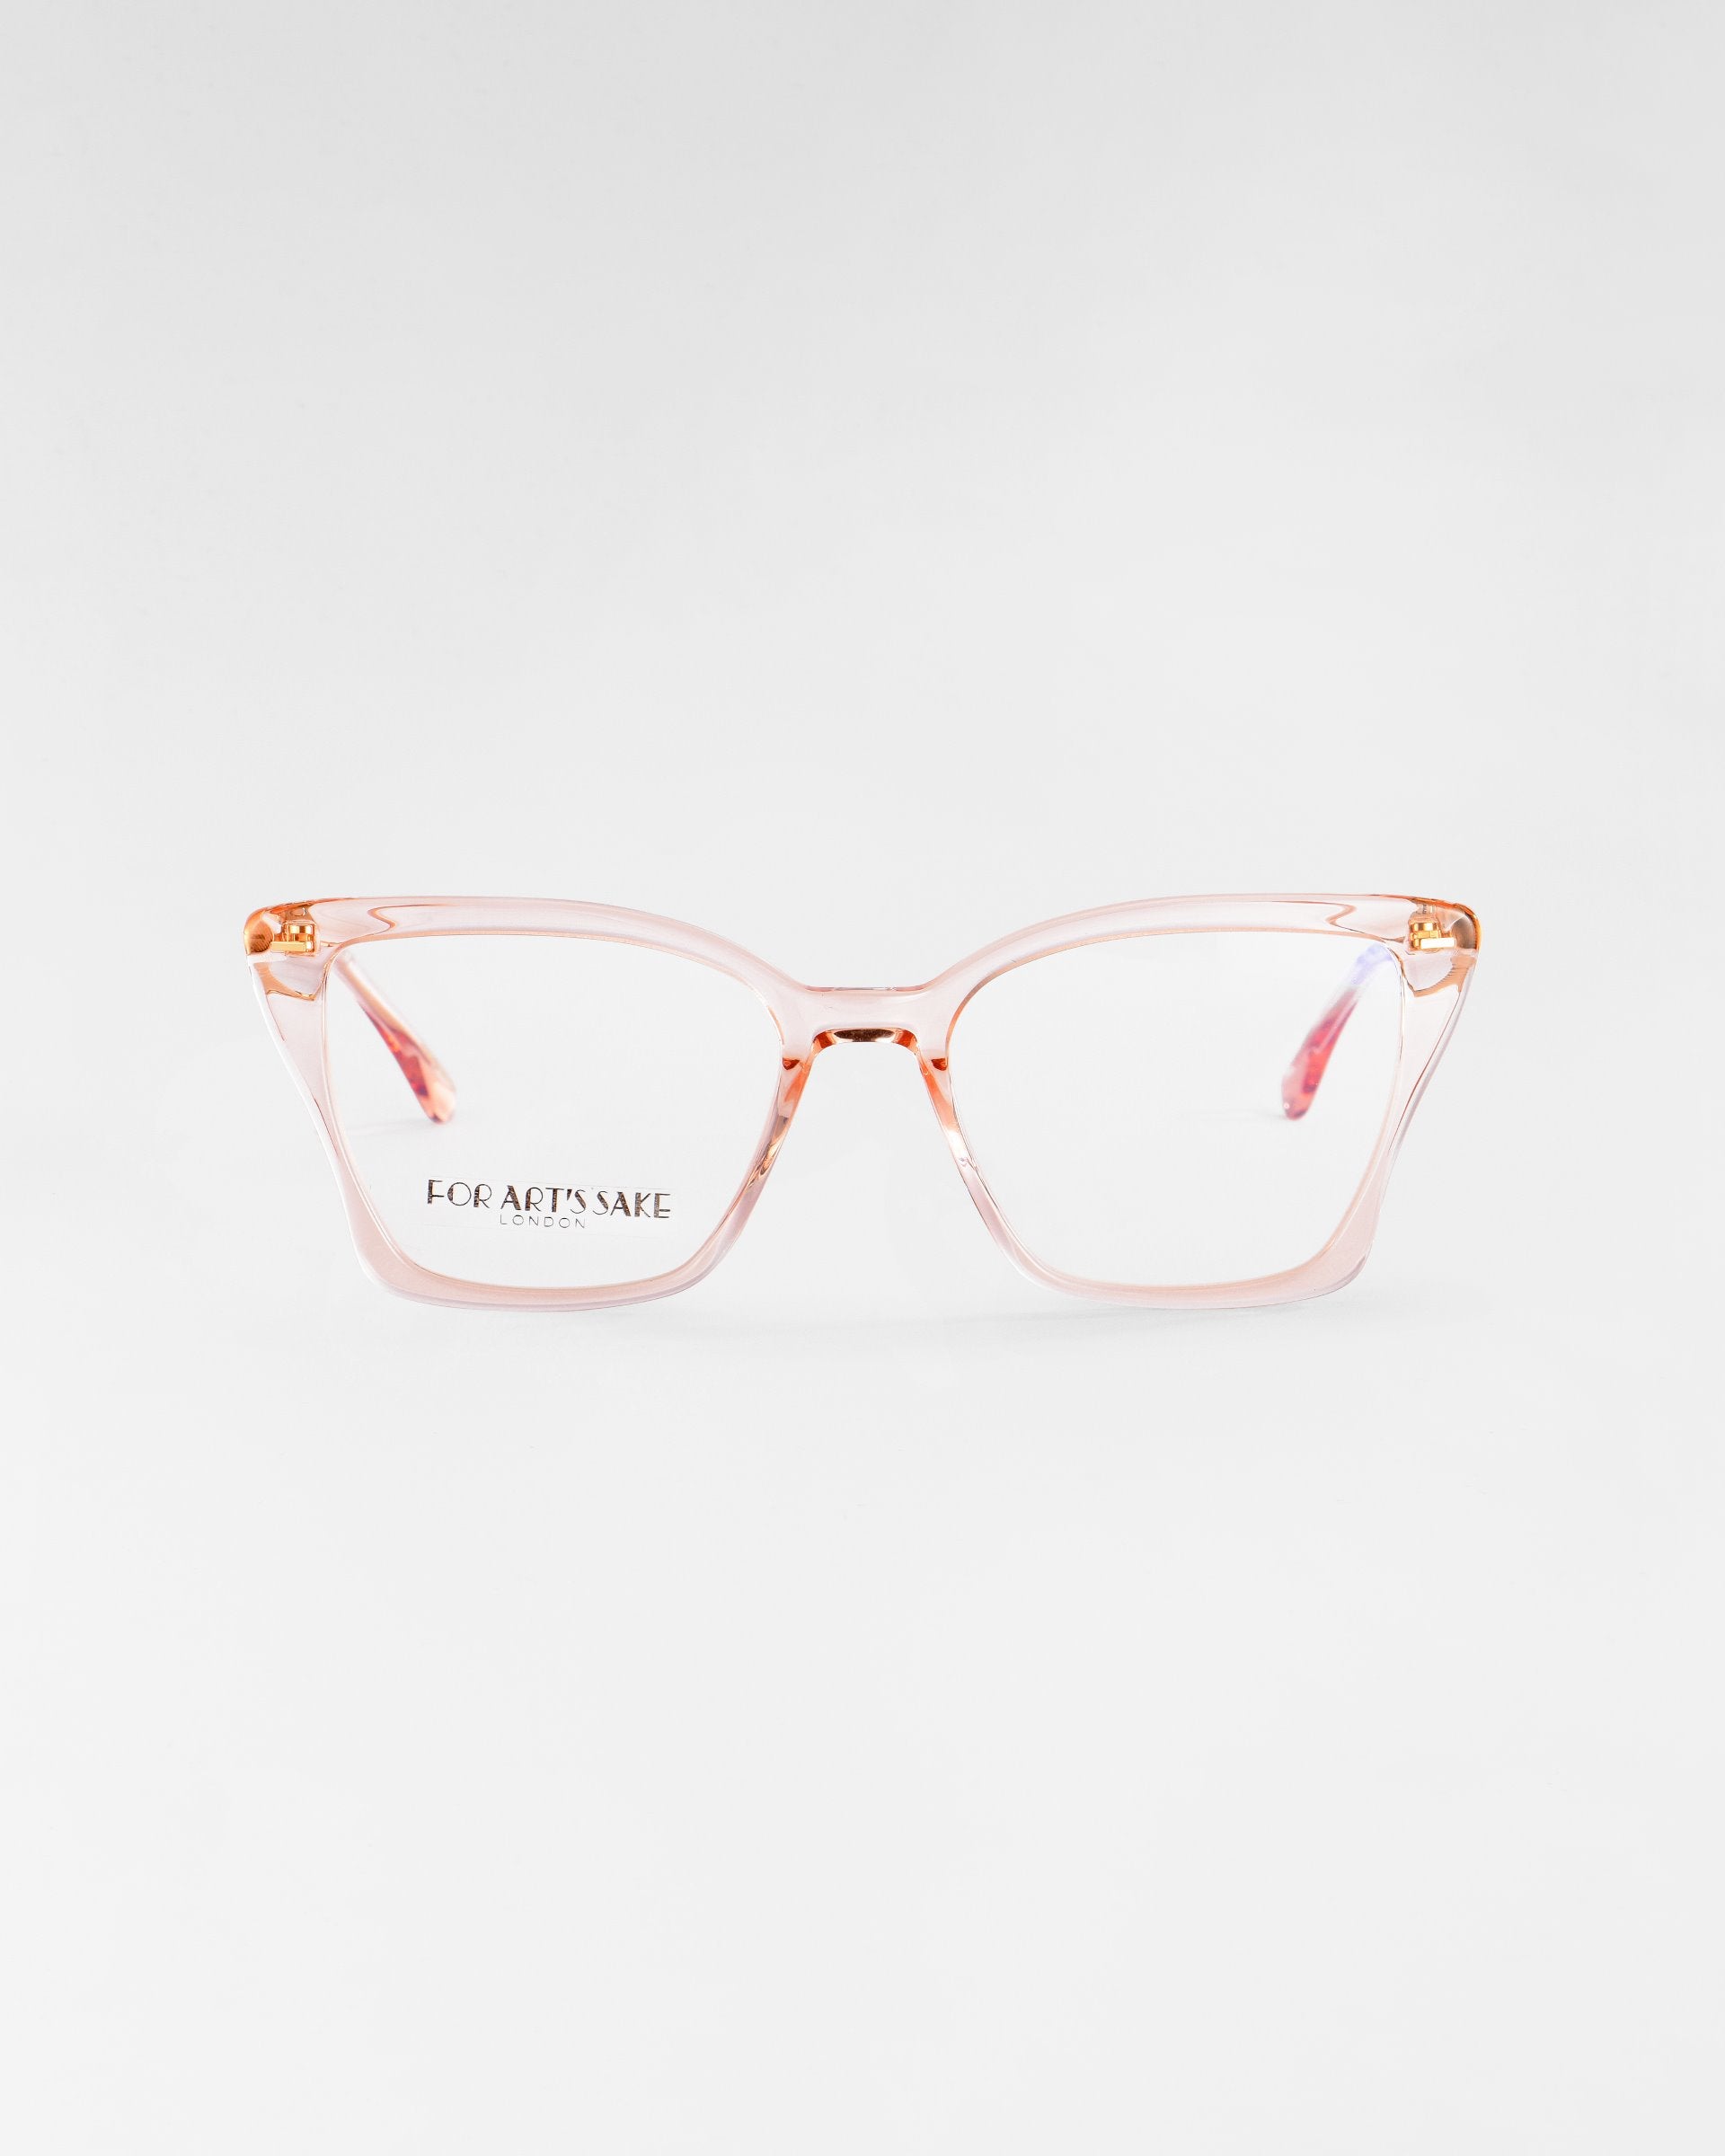 A pair of transparent pink, square-shaped eyeglasses, featuring UV Protection Lenses, is displayed against a plain white background. The product is the Dion by For Art&#39;s Sake®.